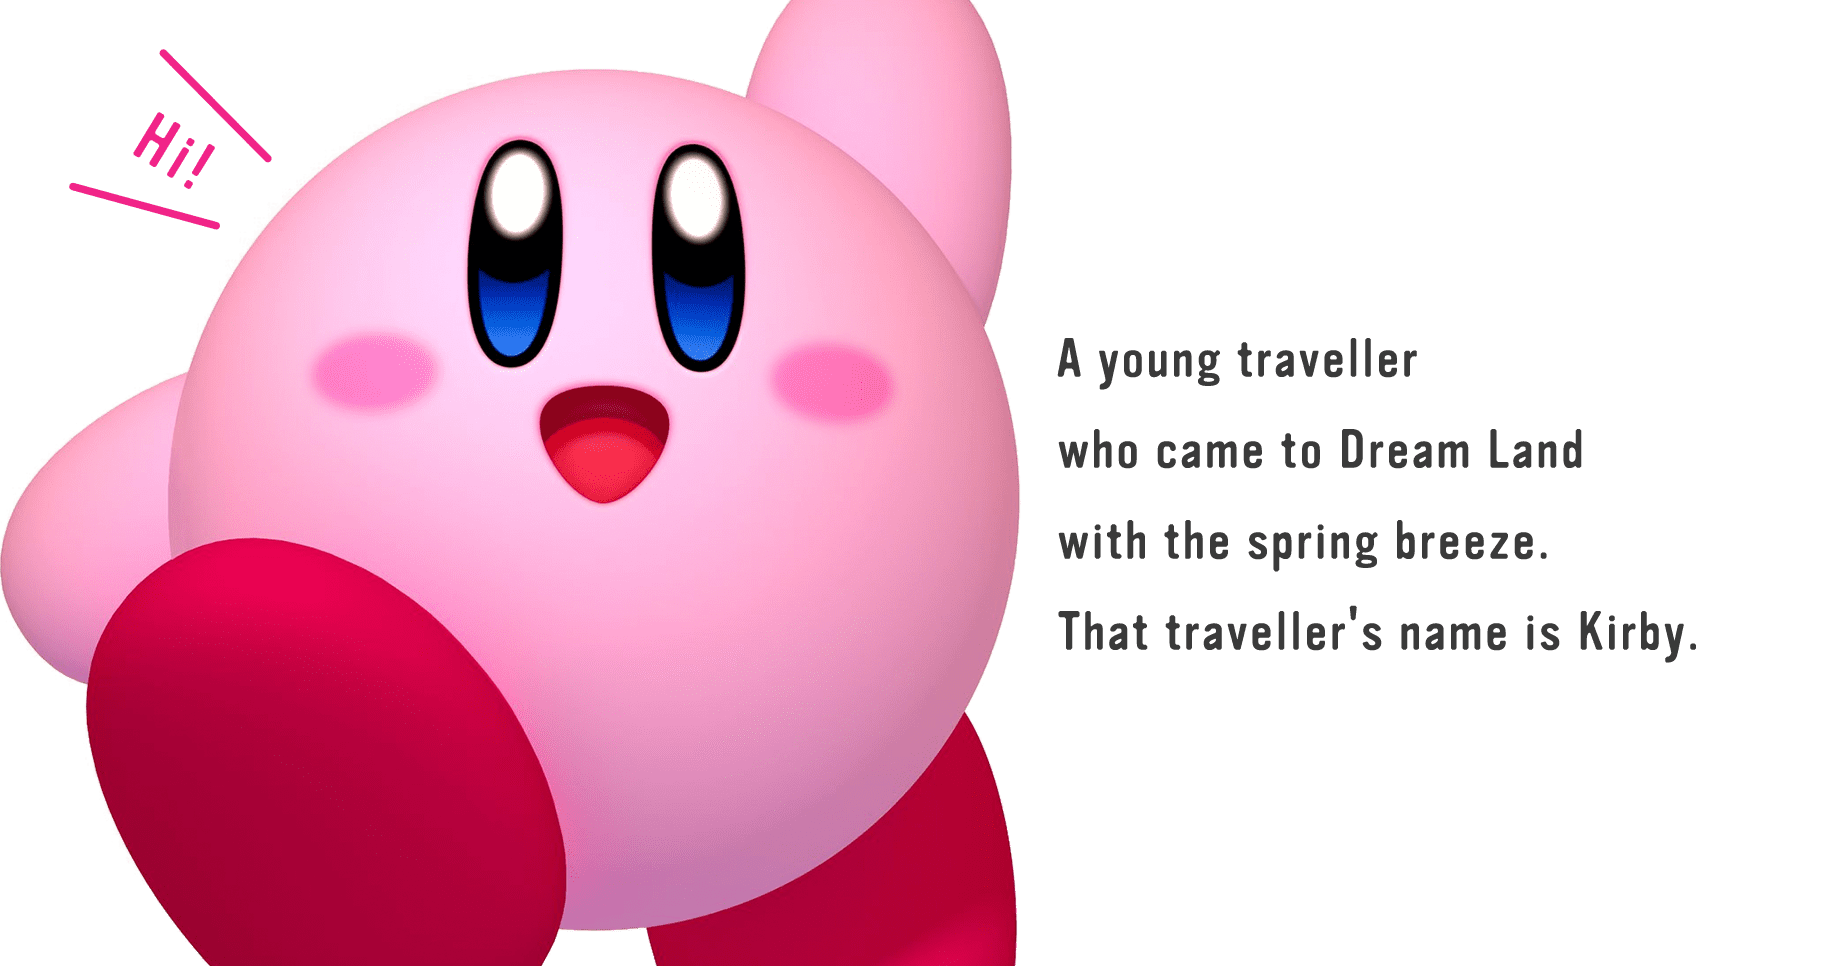 A young traveller who came to Dream Land with the spring breeze. That traveller's name is Kirby.